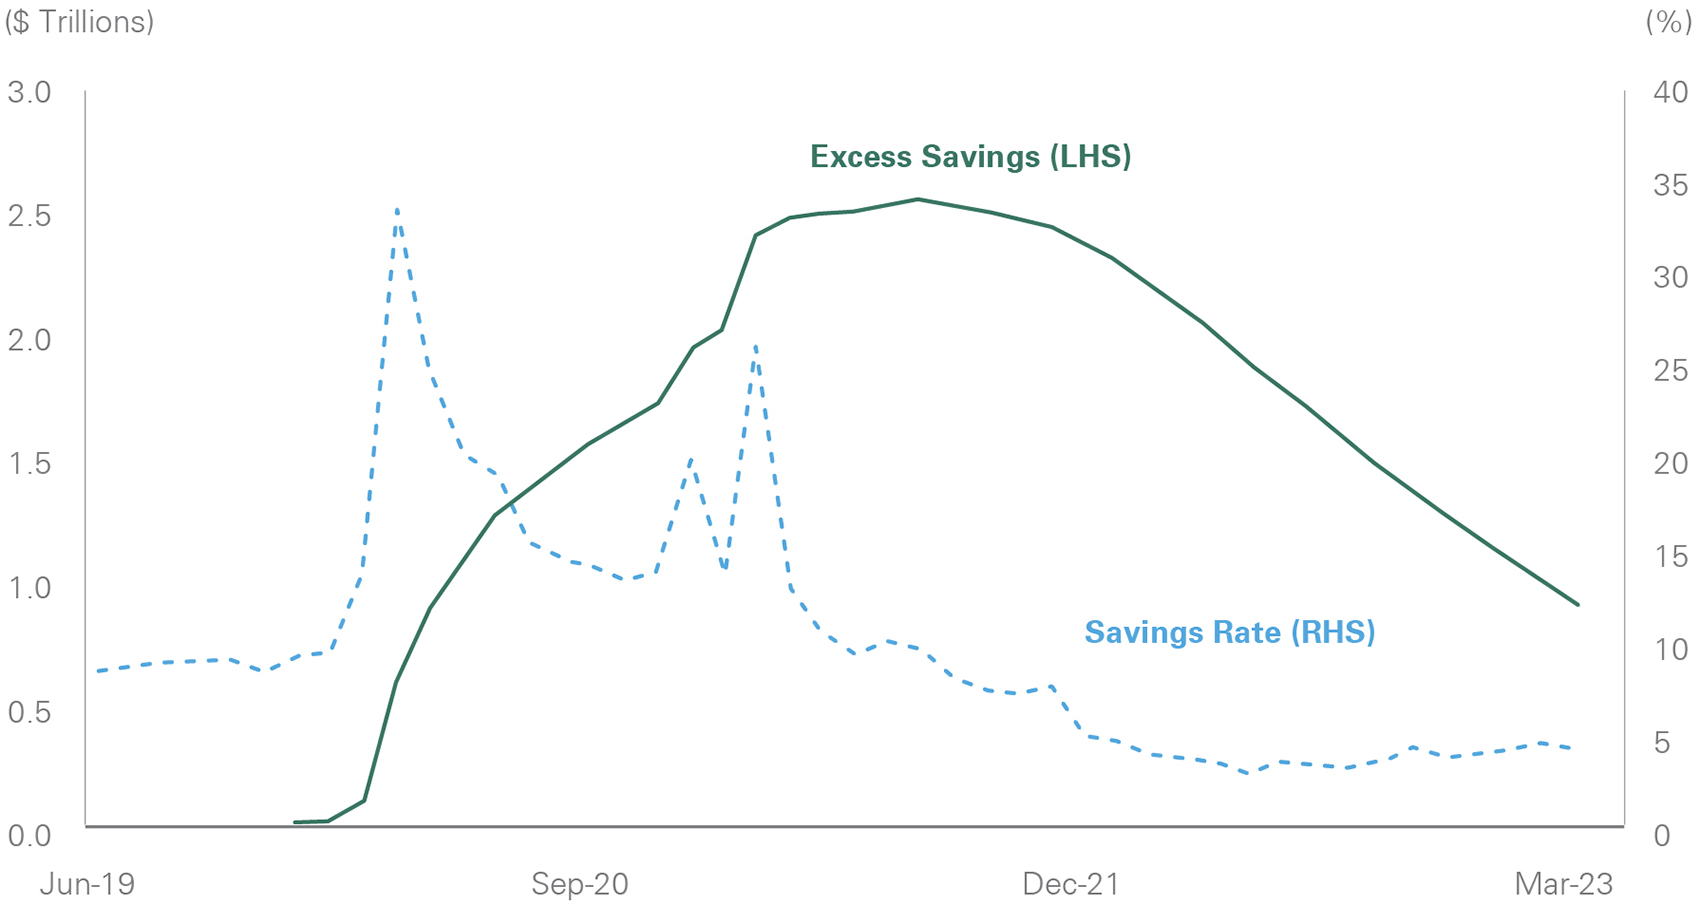 Although consumers have spent down excess savings from the pandemic, around $1 trillion of excess saving remains.